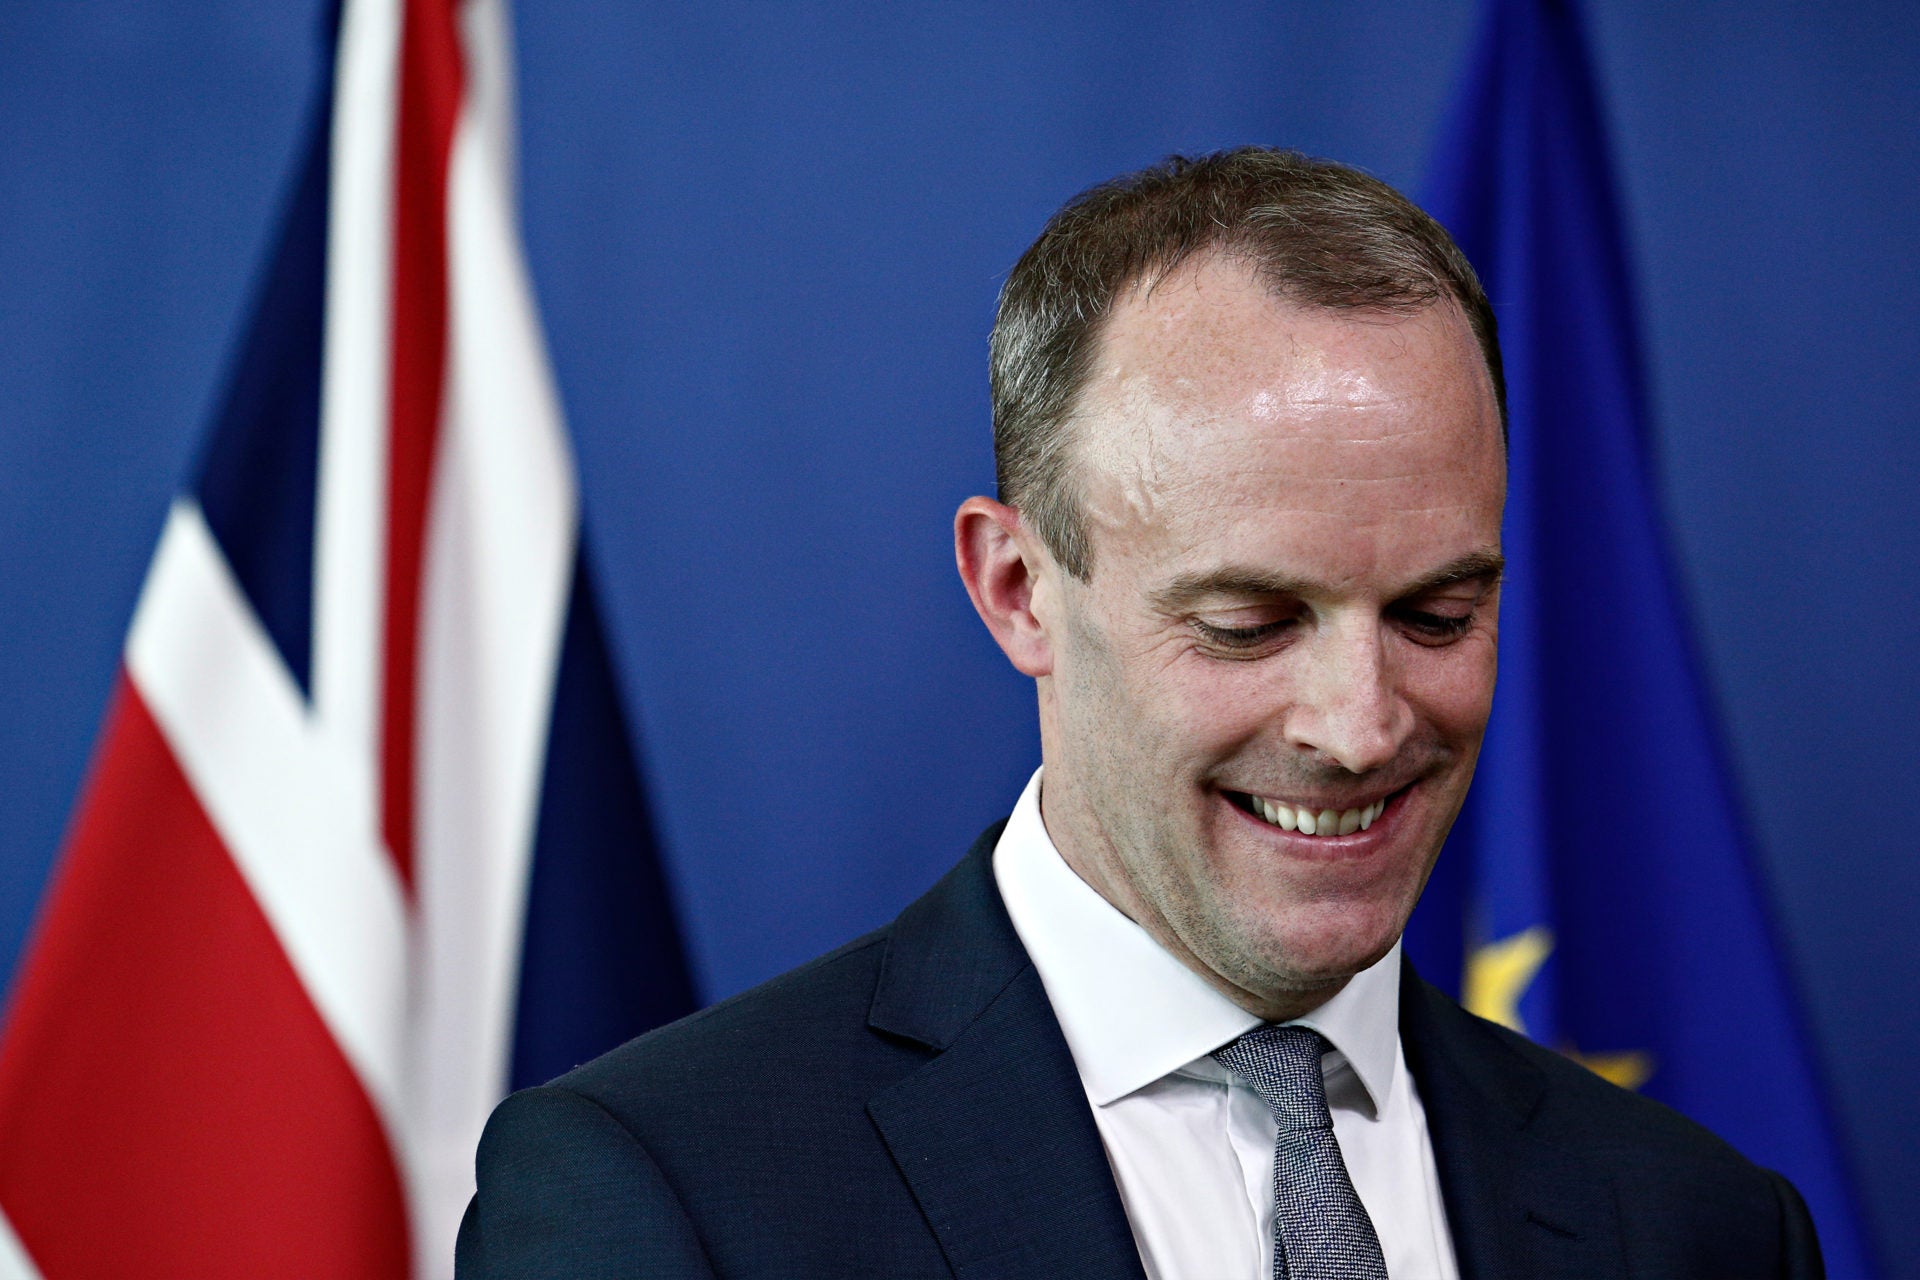 Dominic Raab Facebook ads breached advertising policy, despite spending £56,000